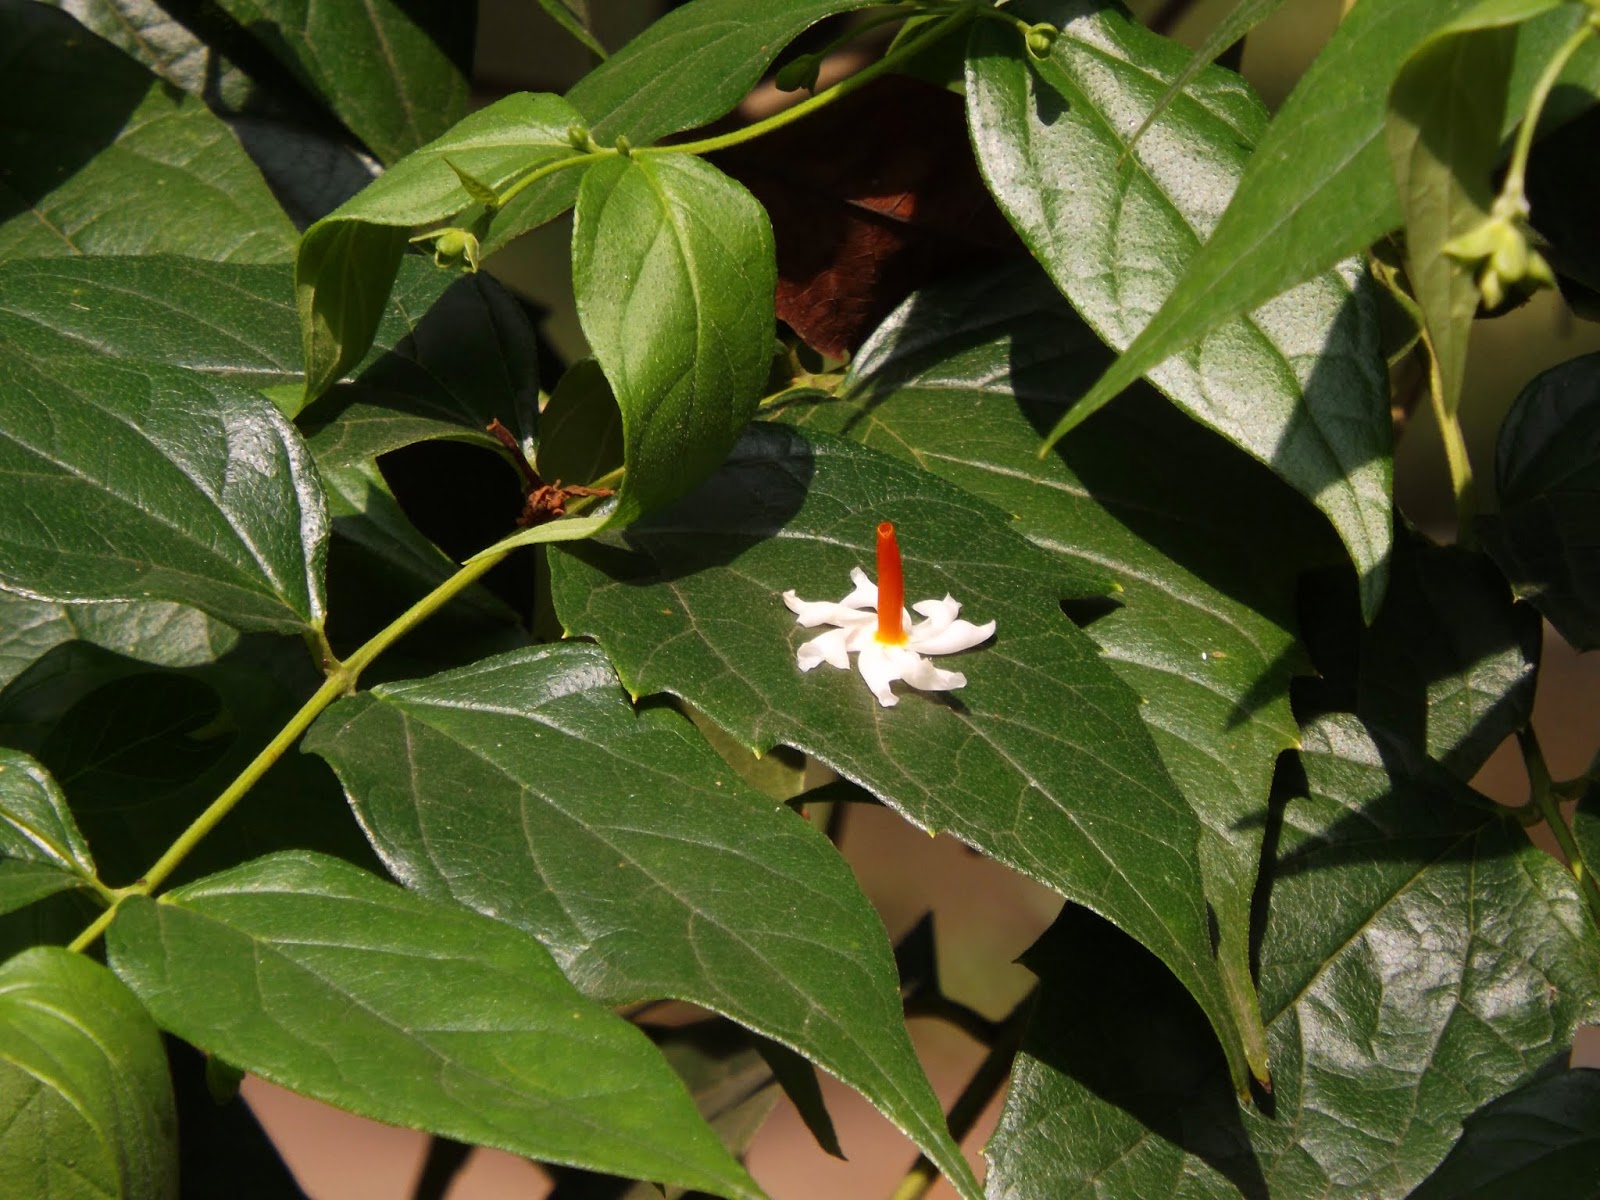 Shiuly or Night jasmine, Nyctanthes arbor-tristis